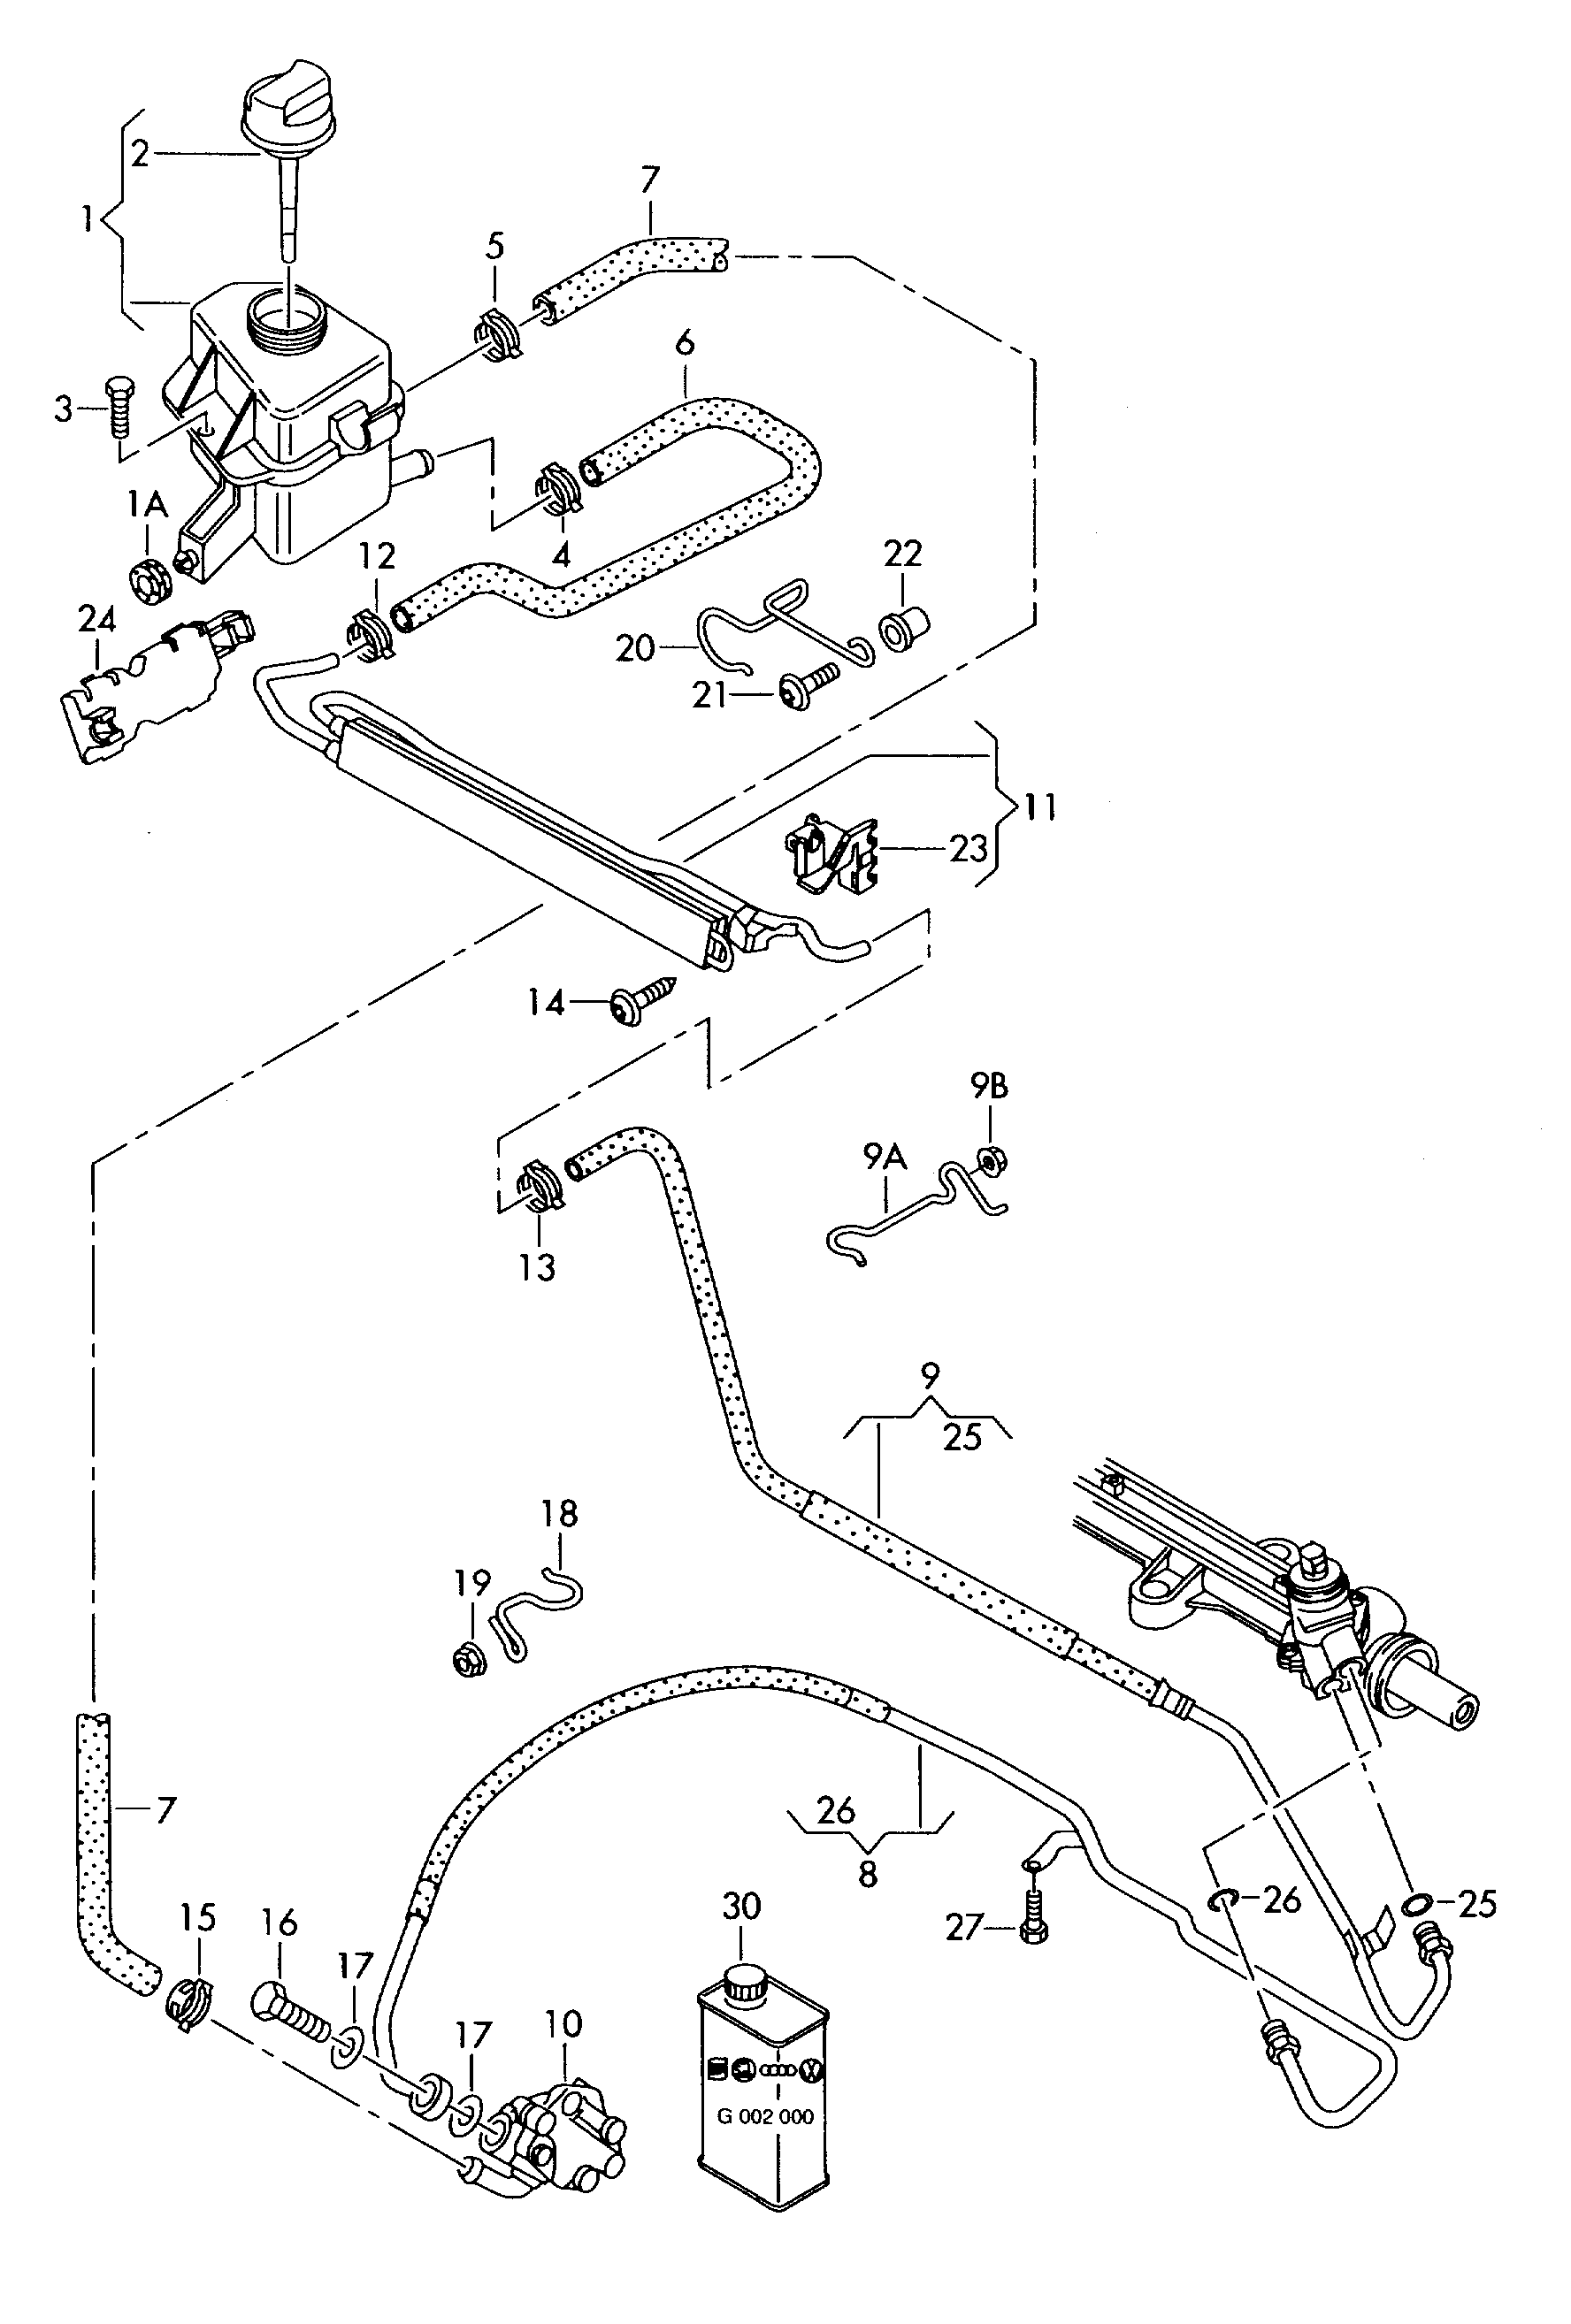 oil container and connection
parts, hoses - Transporter(TR)  